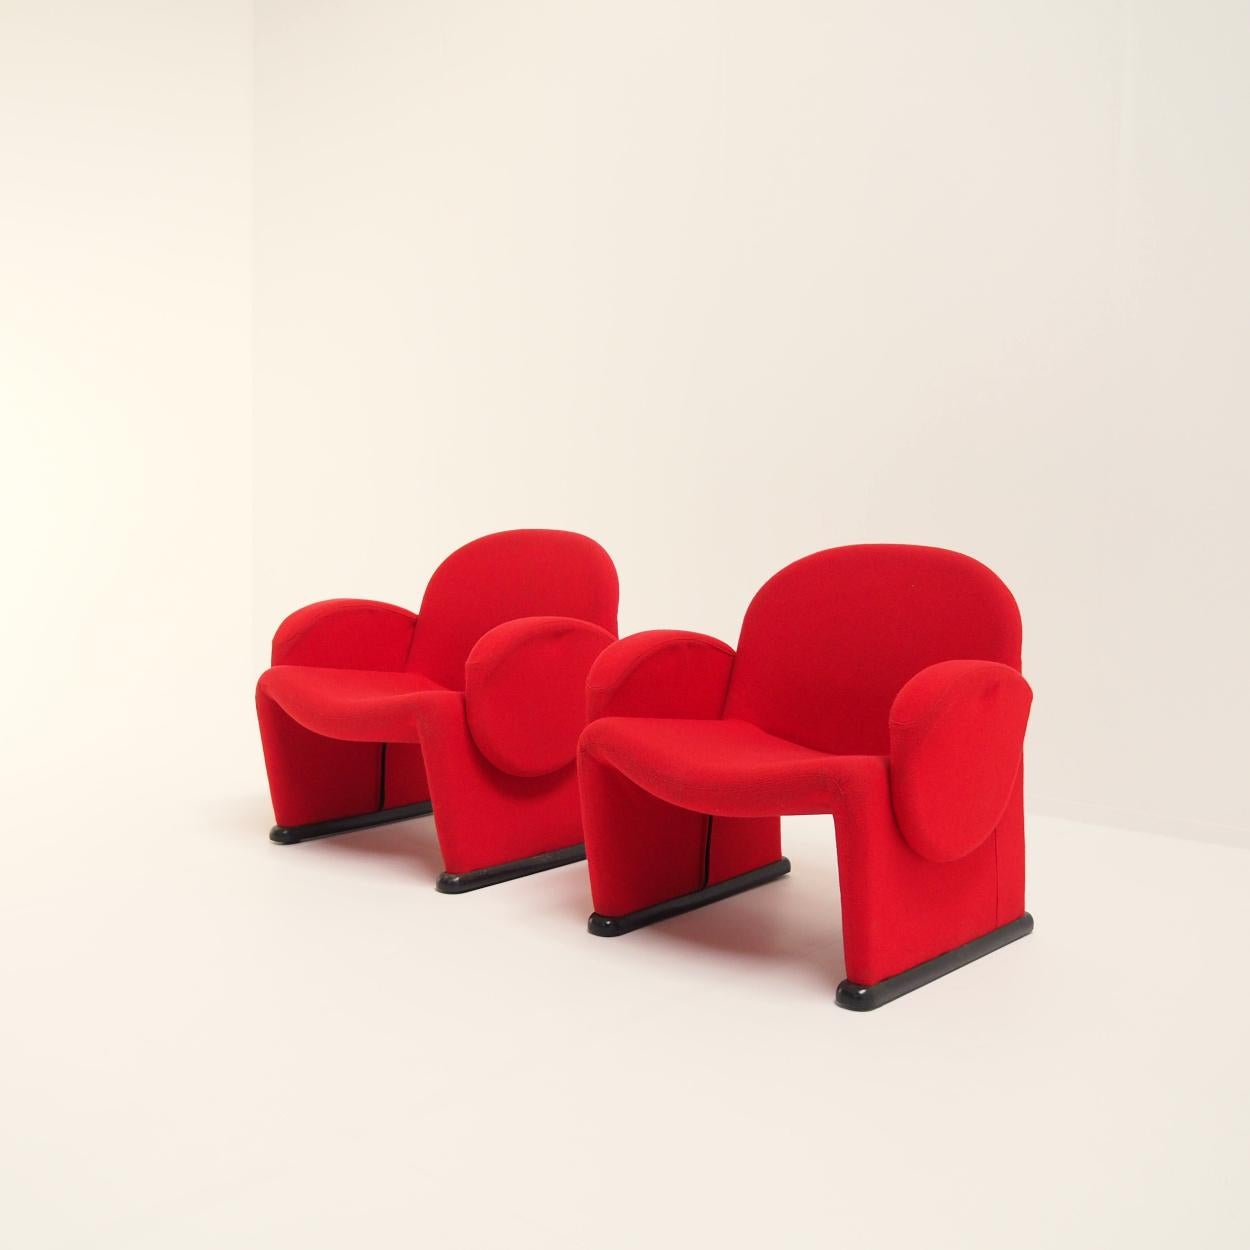 Space Age Funky Red Chairs from the 70s, Pierre Paulin Style For Sale